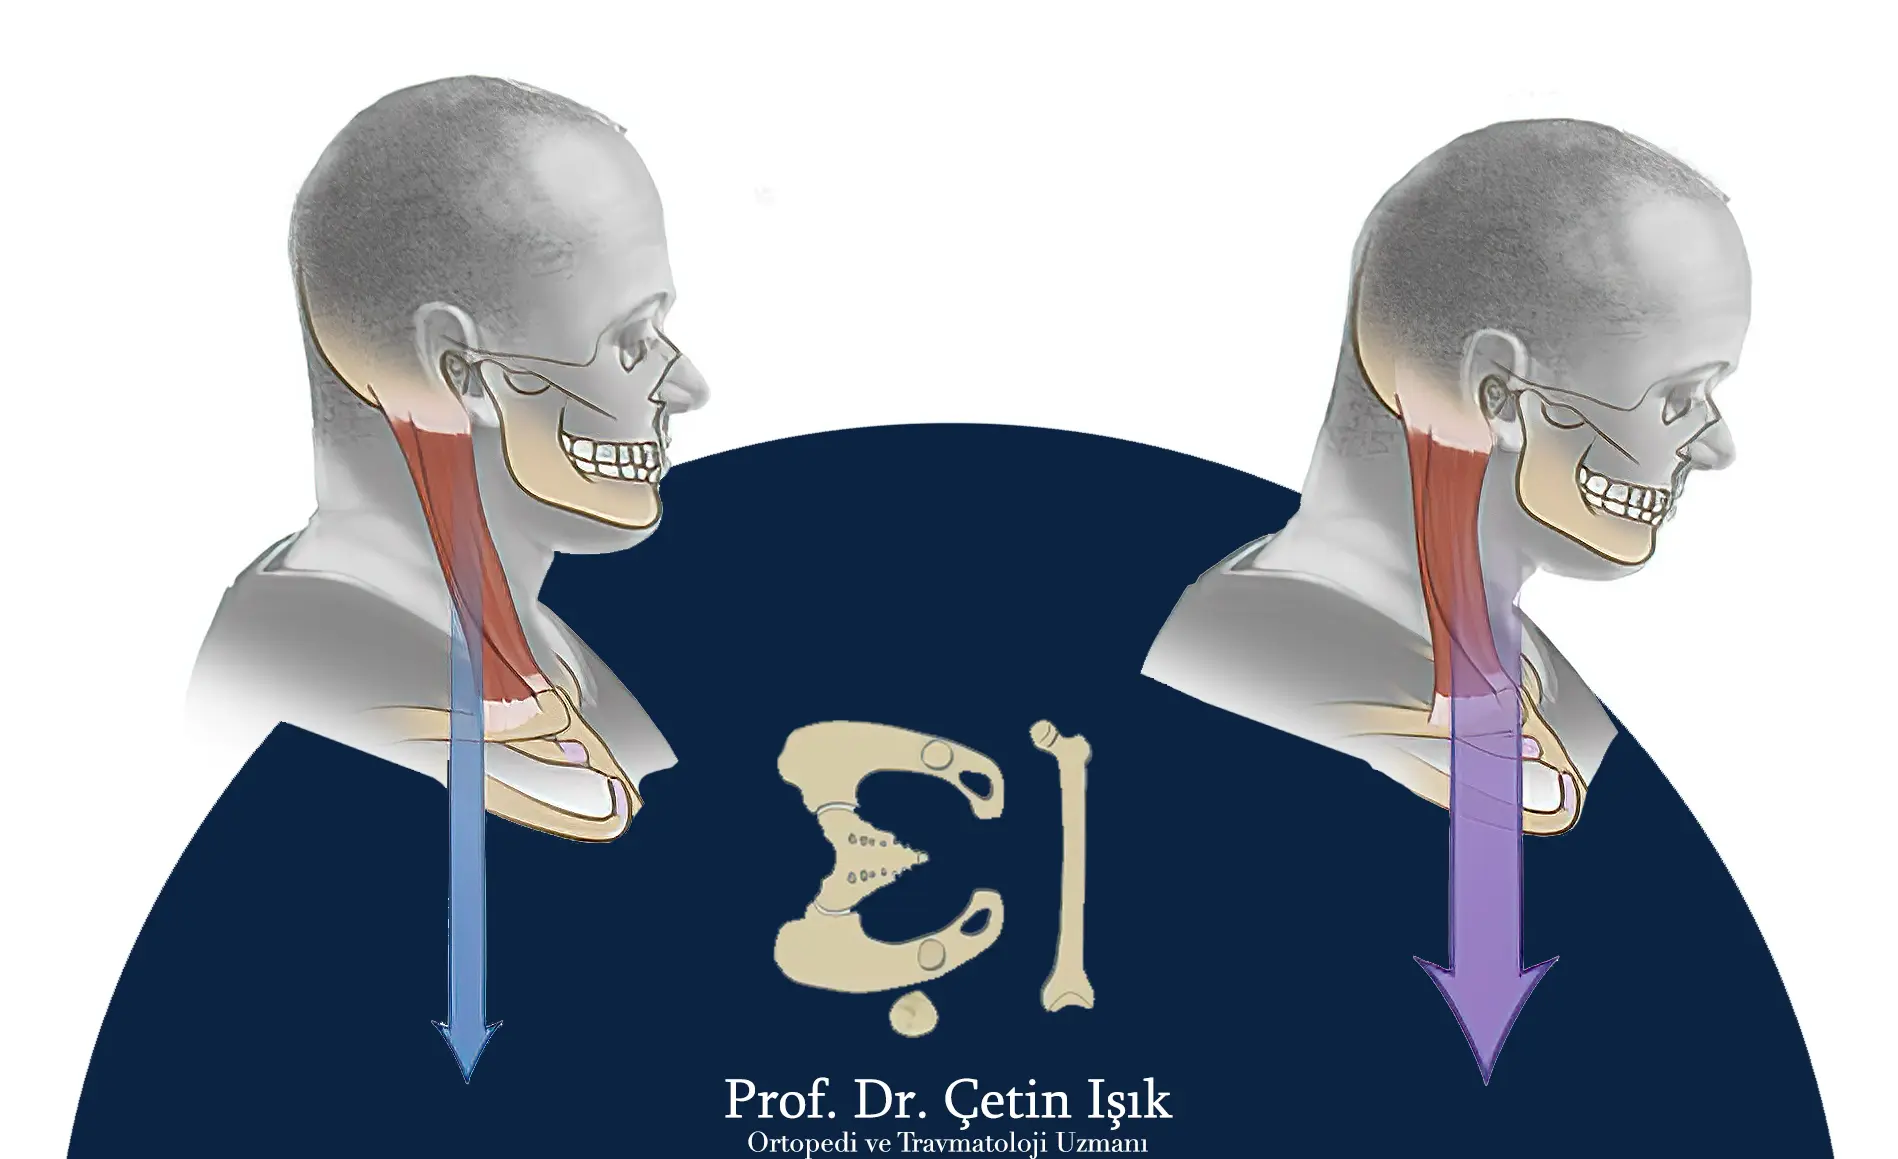 An image showing the effect of the wrong position of the neck on the tendons by bending the head forward for a long time, which causes stress on the tendons